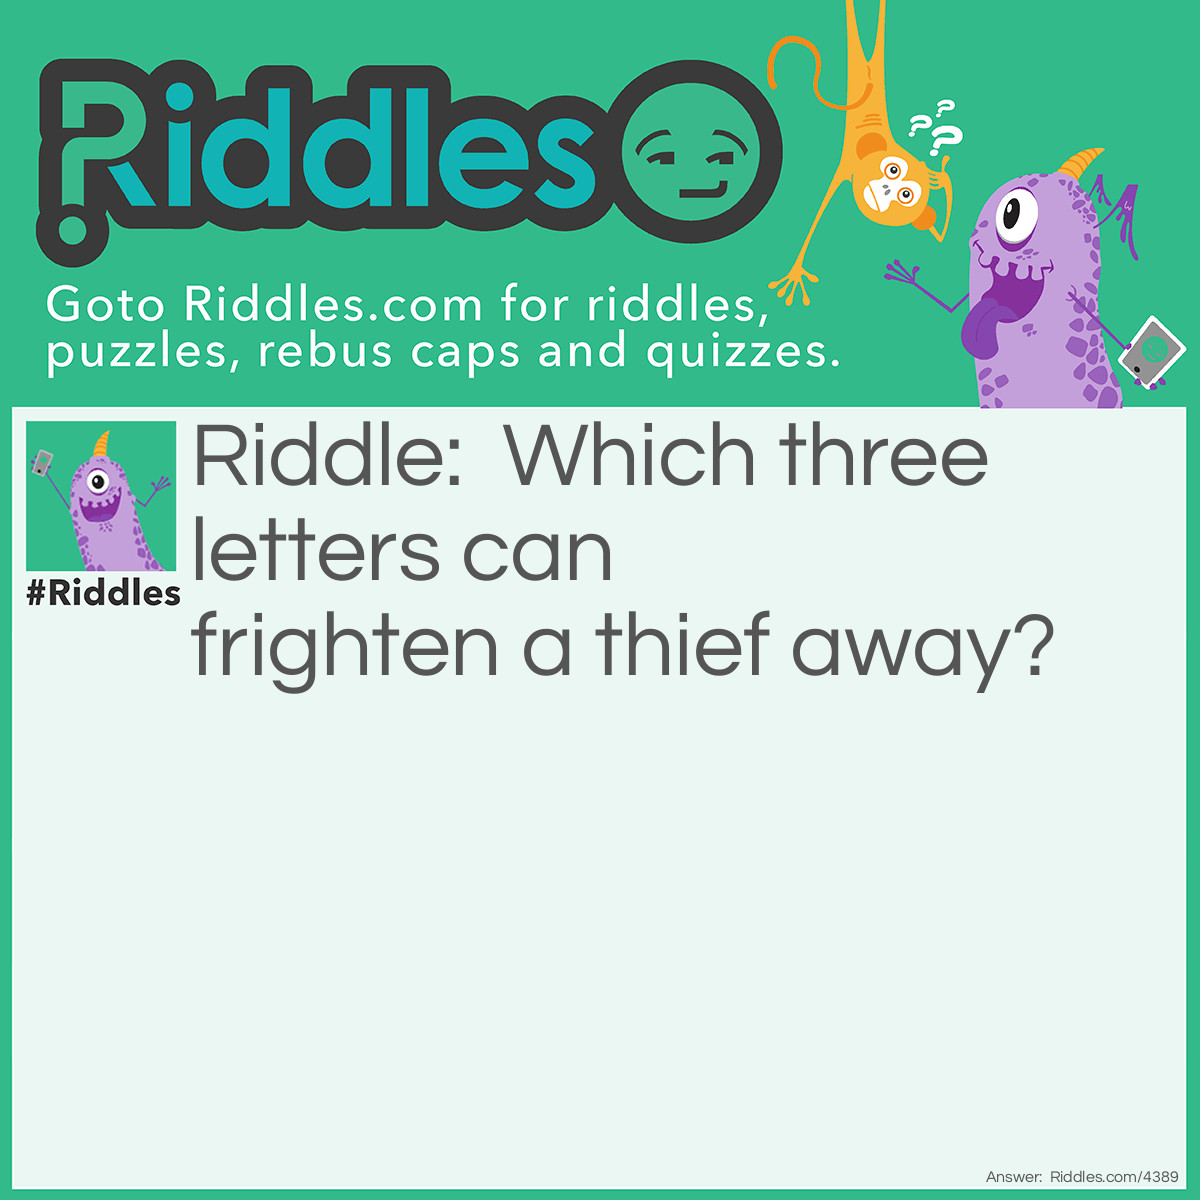 Riddle: Which three letters can frighten a thief away? Answer: I C U.